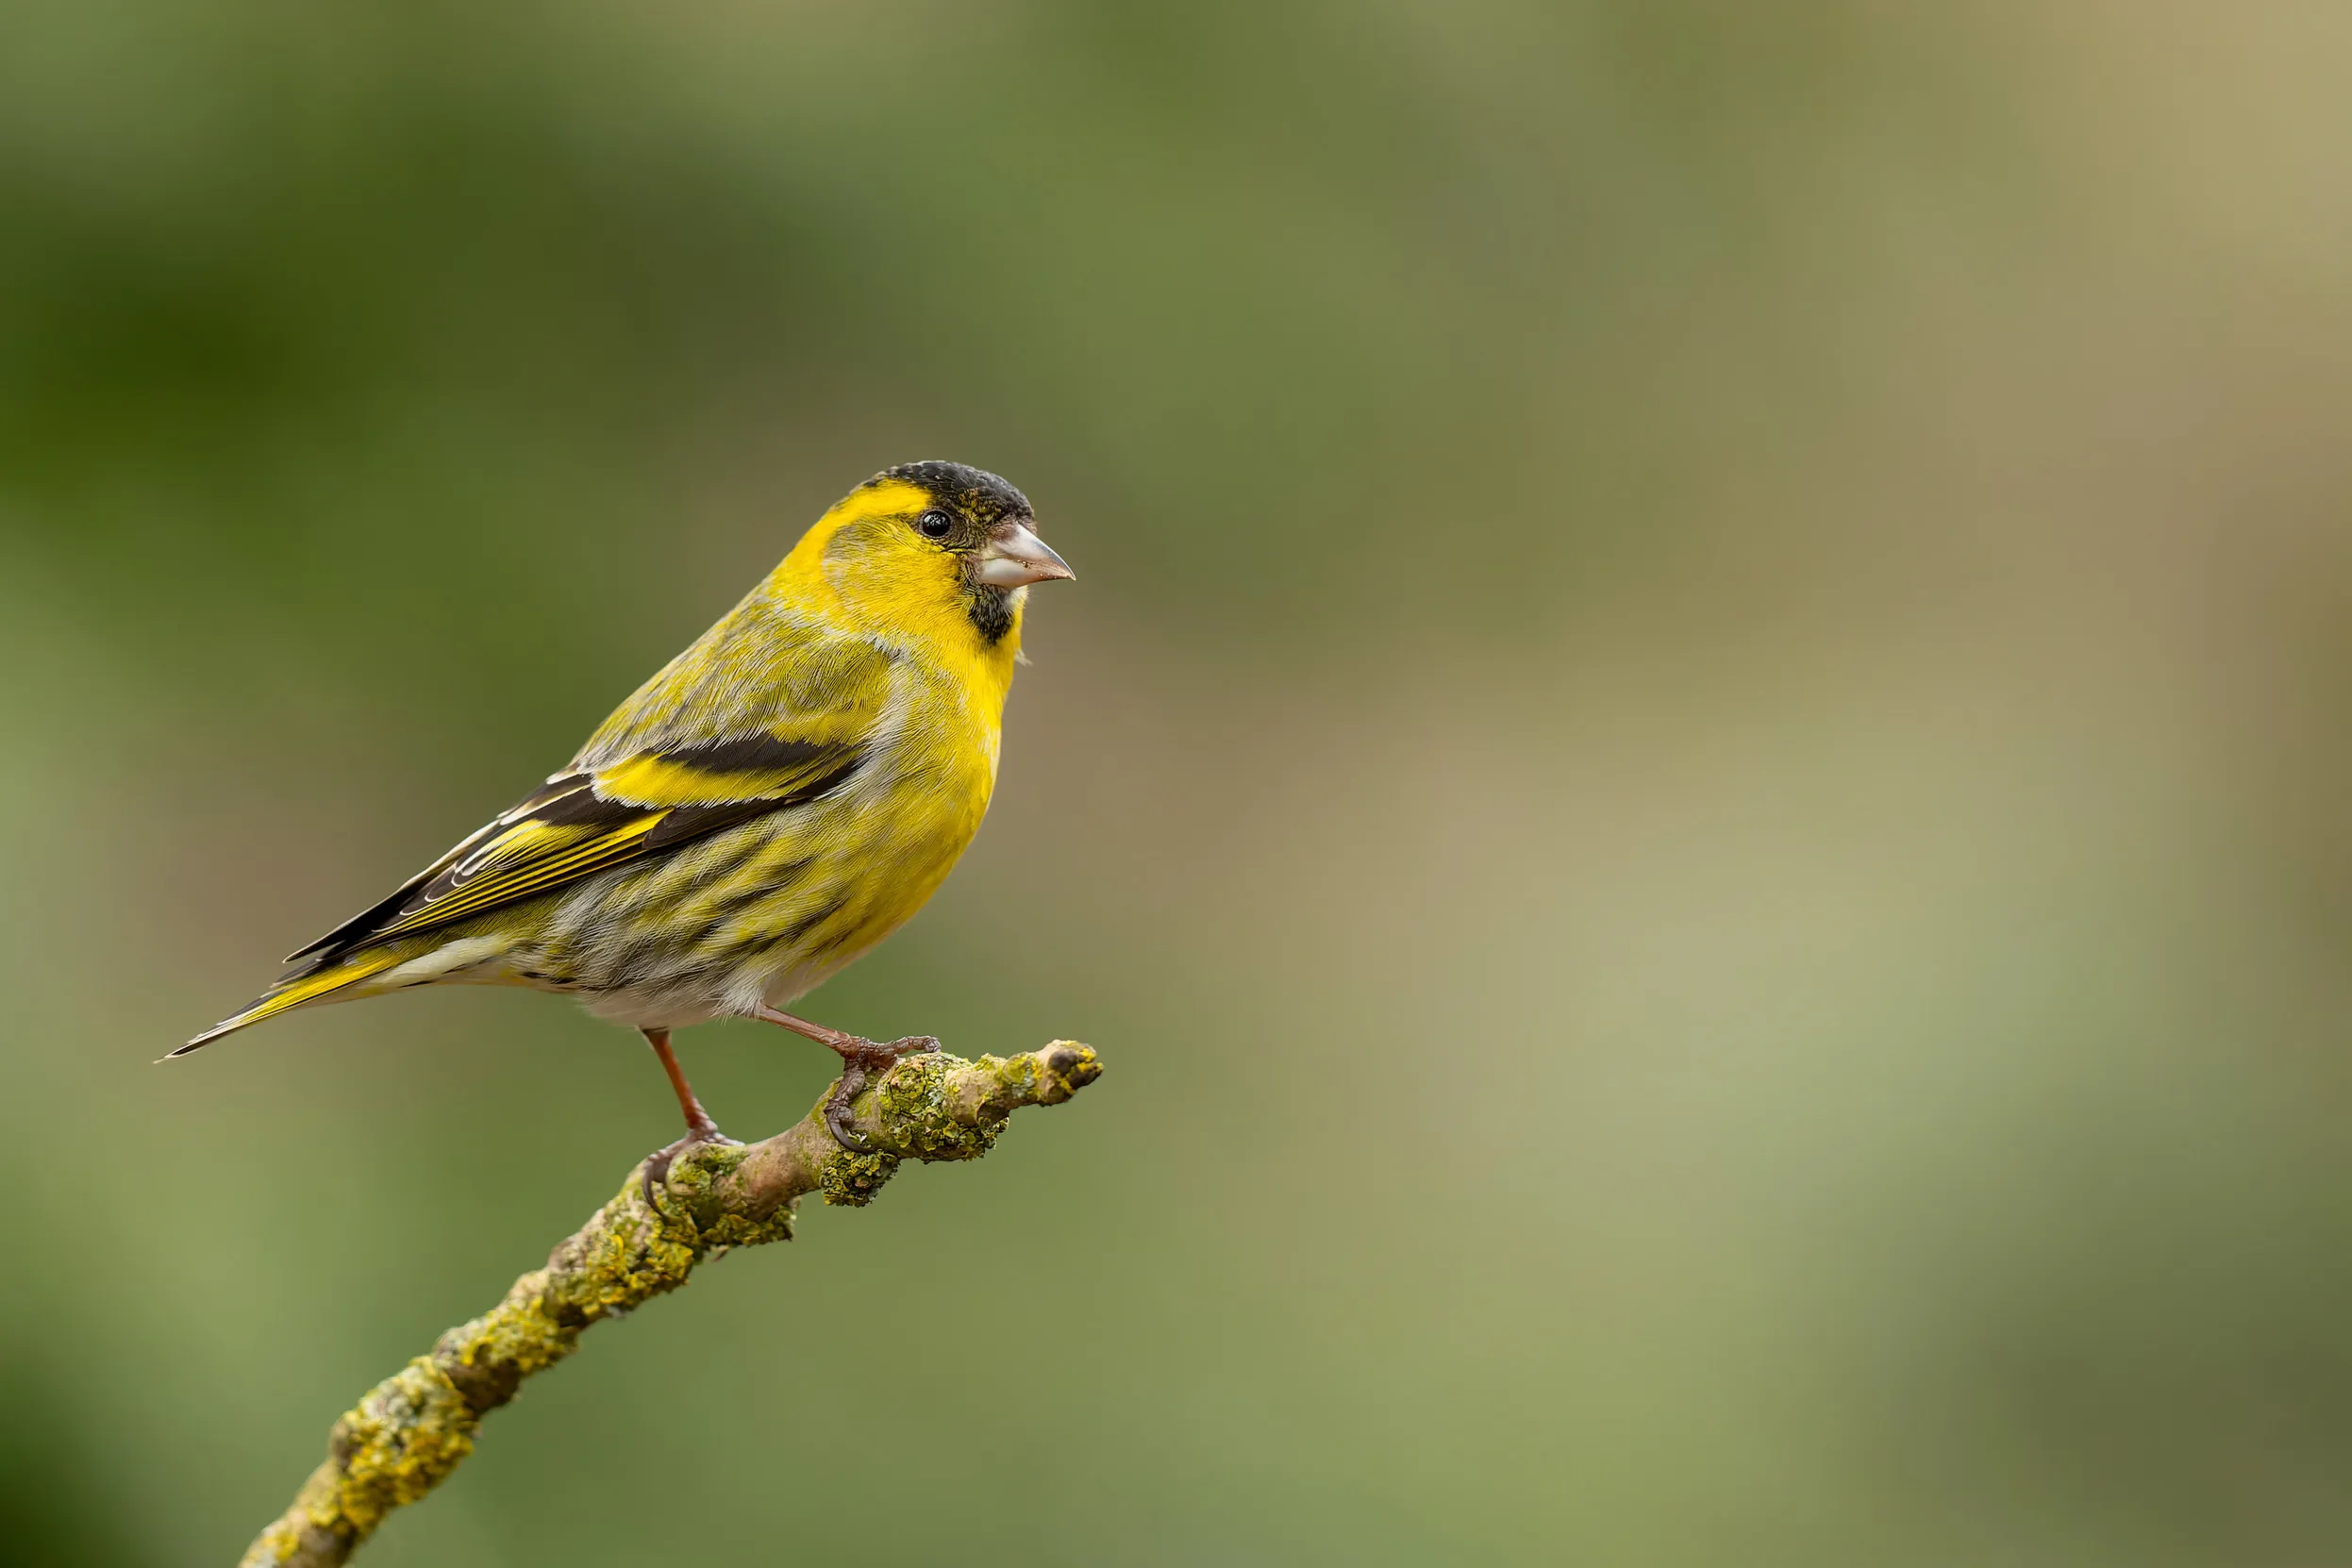 A male Siskin perched at the end of a branch.